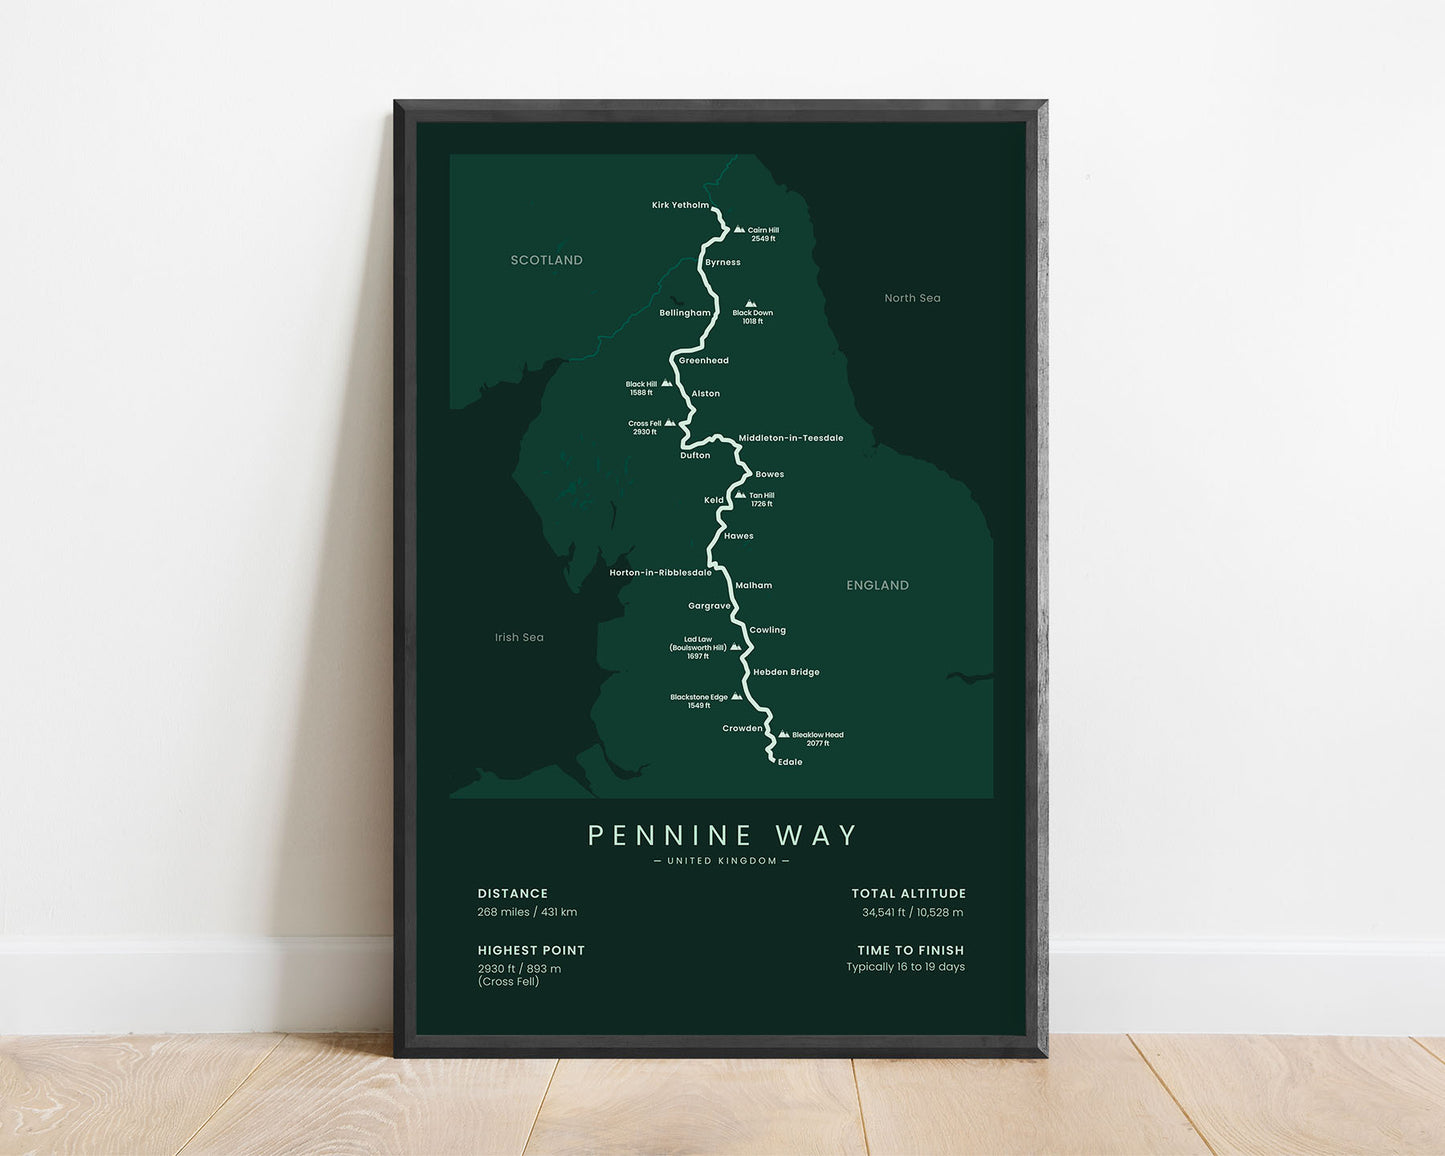 Pennine Way (pennines mountains) trek poster with green background